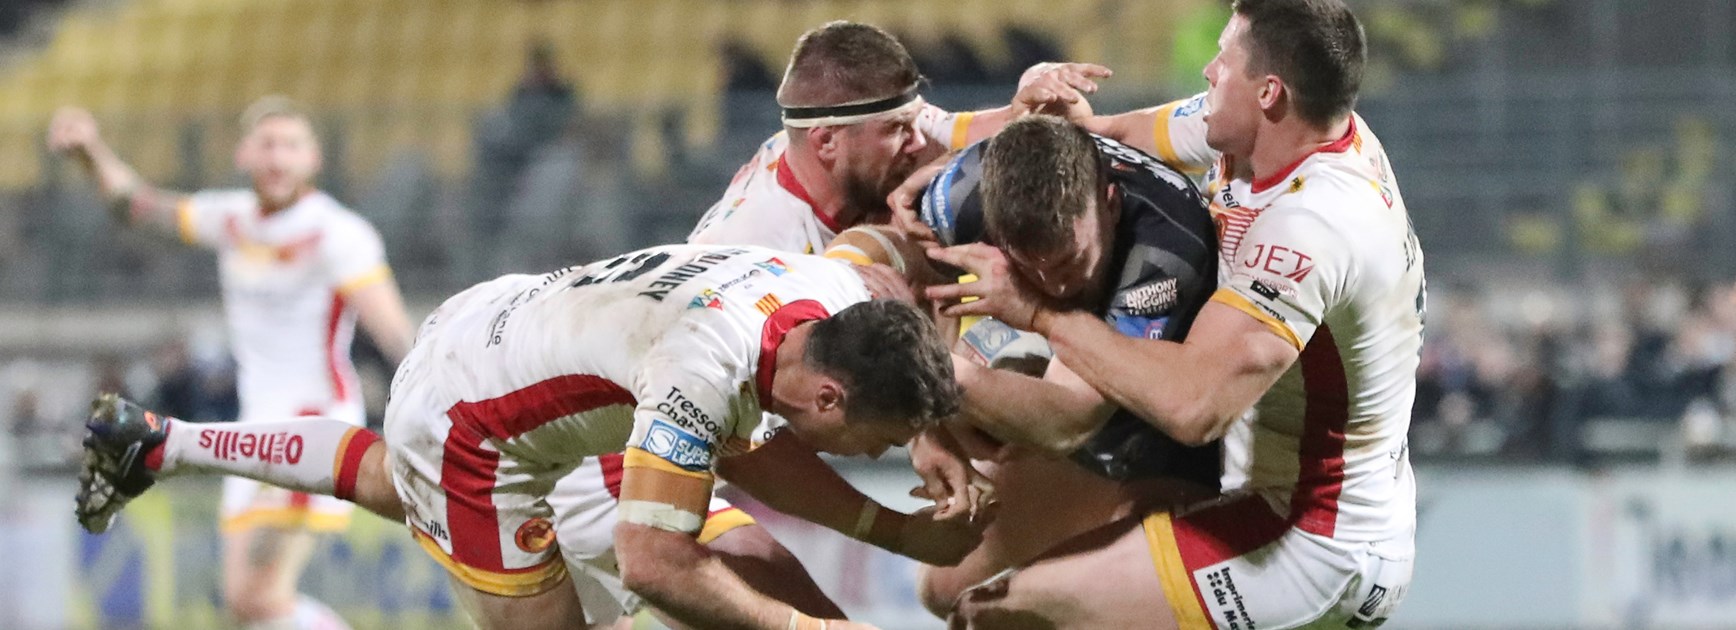 The Catalans defence swarms against Castleford.